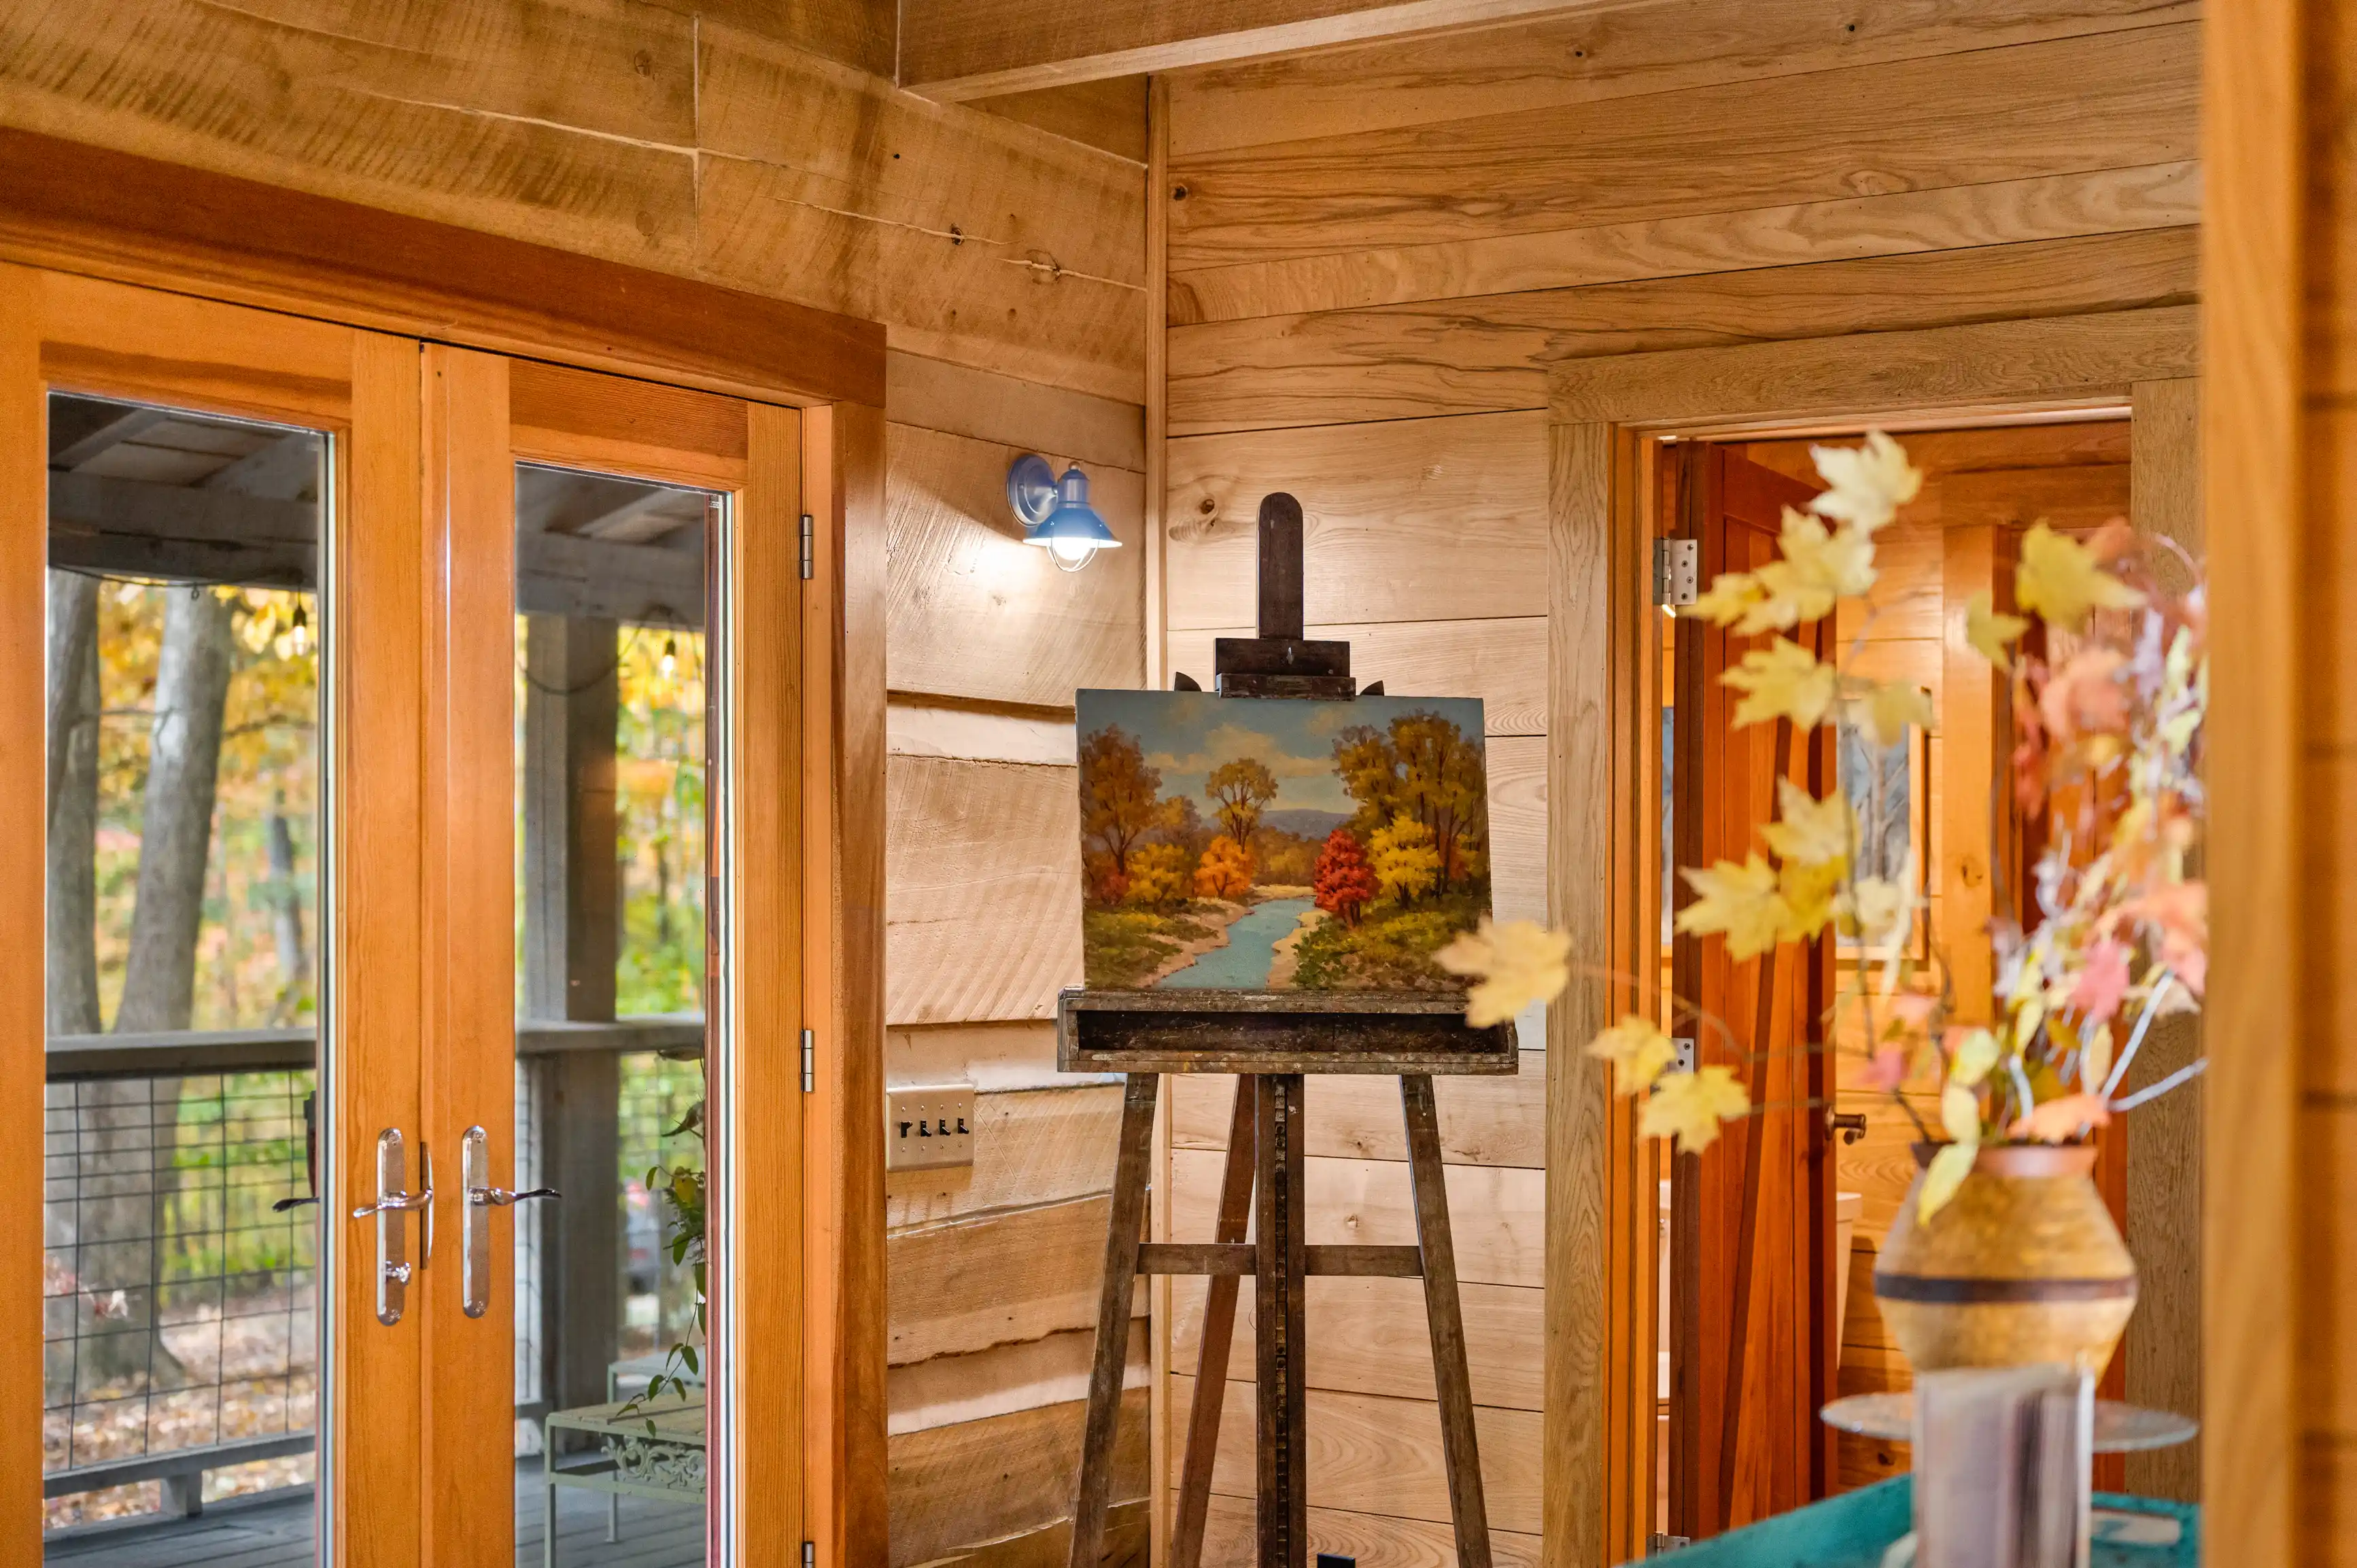 A cozy art corner in a wooden cabin with a landscape painting on an easel, a blue lamp on the wall, and glass doors opening to a deck surrounded by autumn trees.